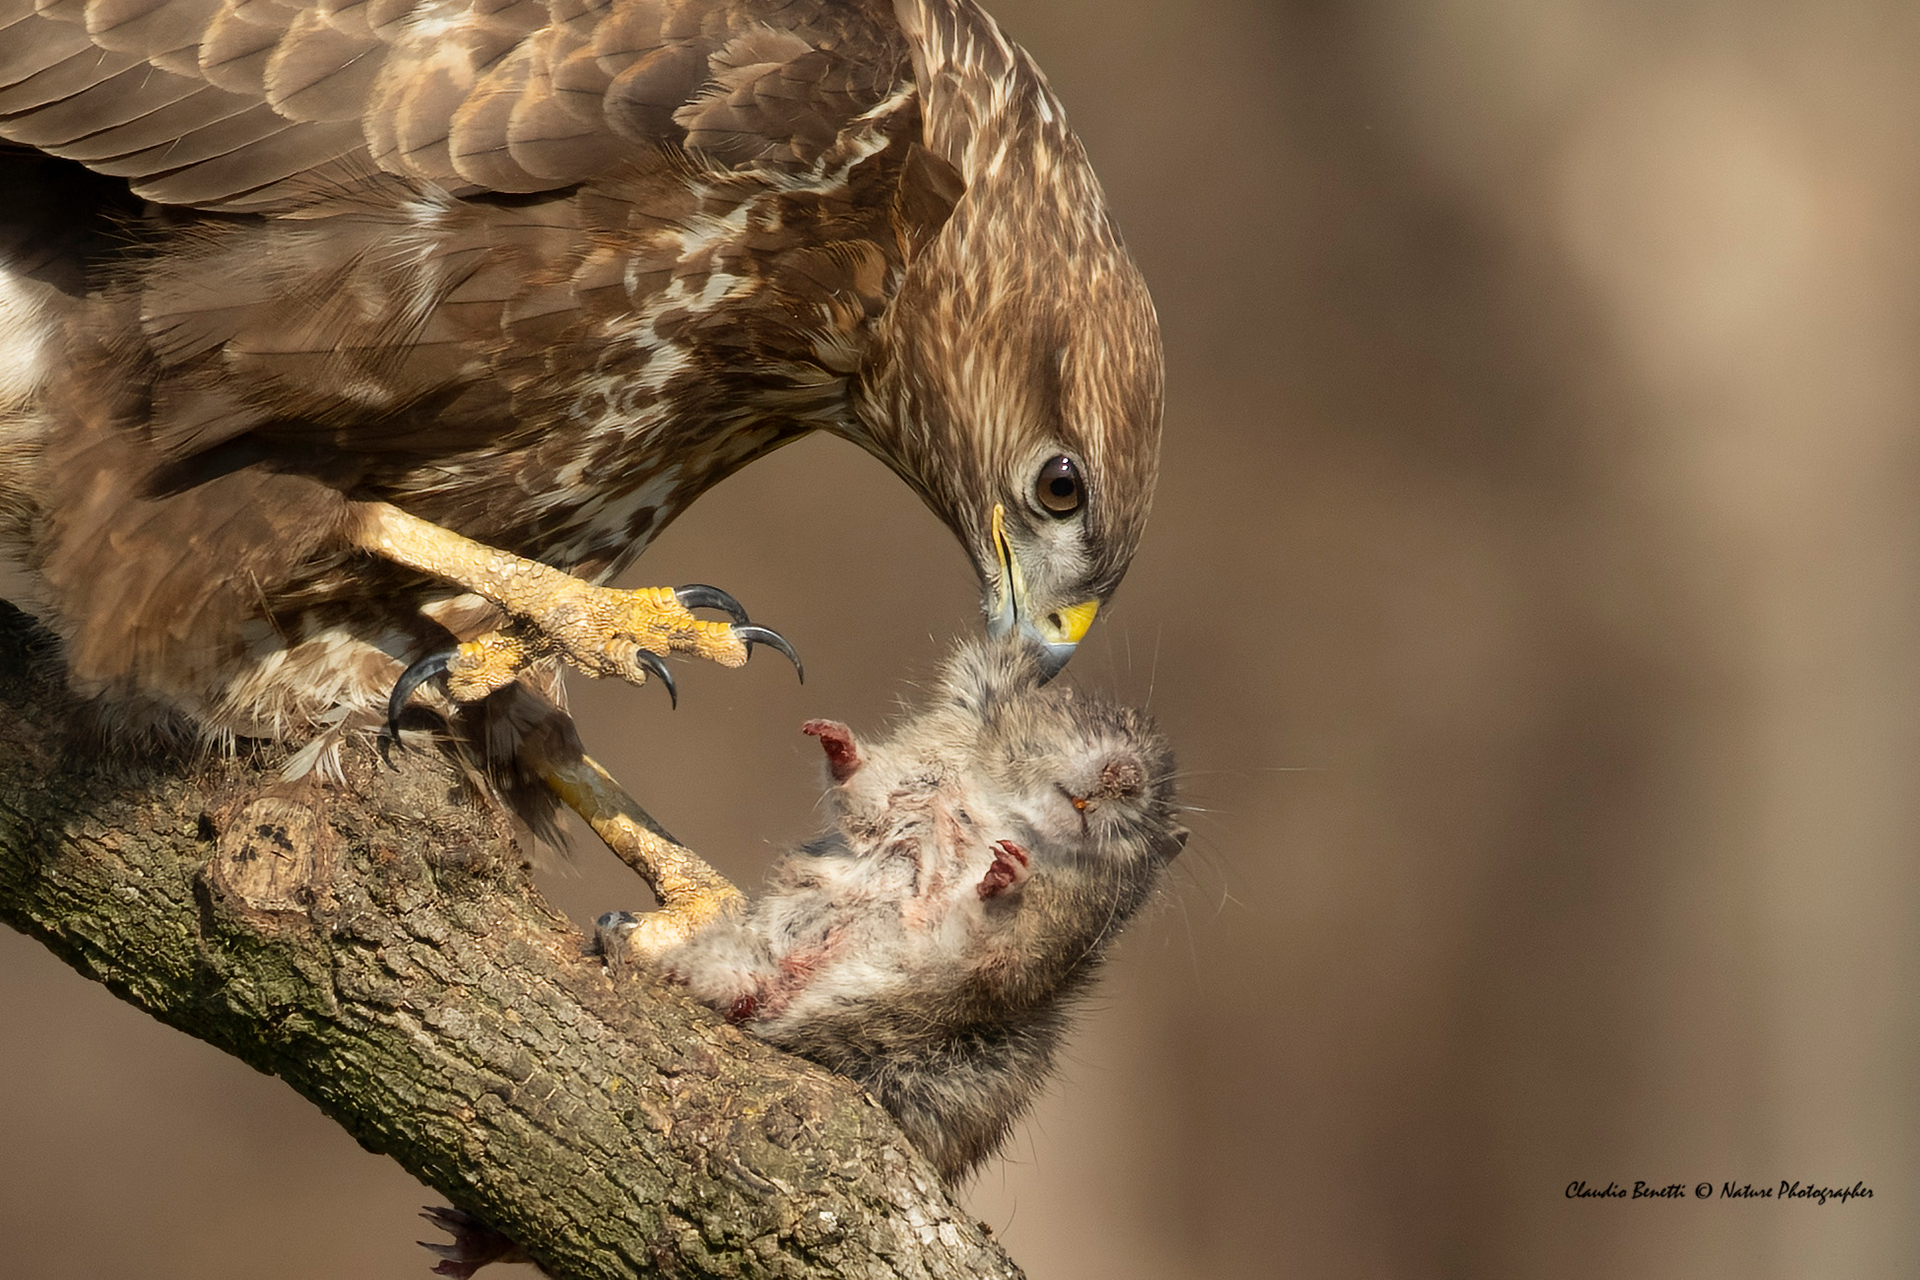 The meal of the Buzzard...